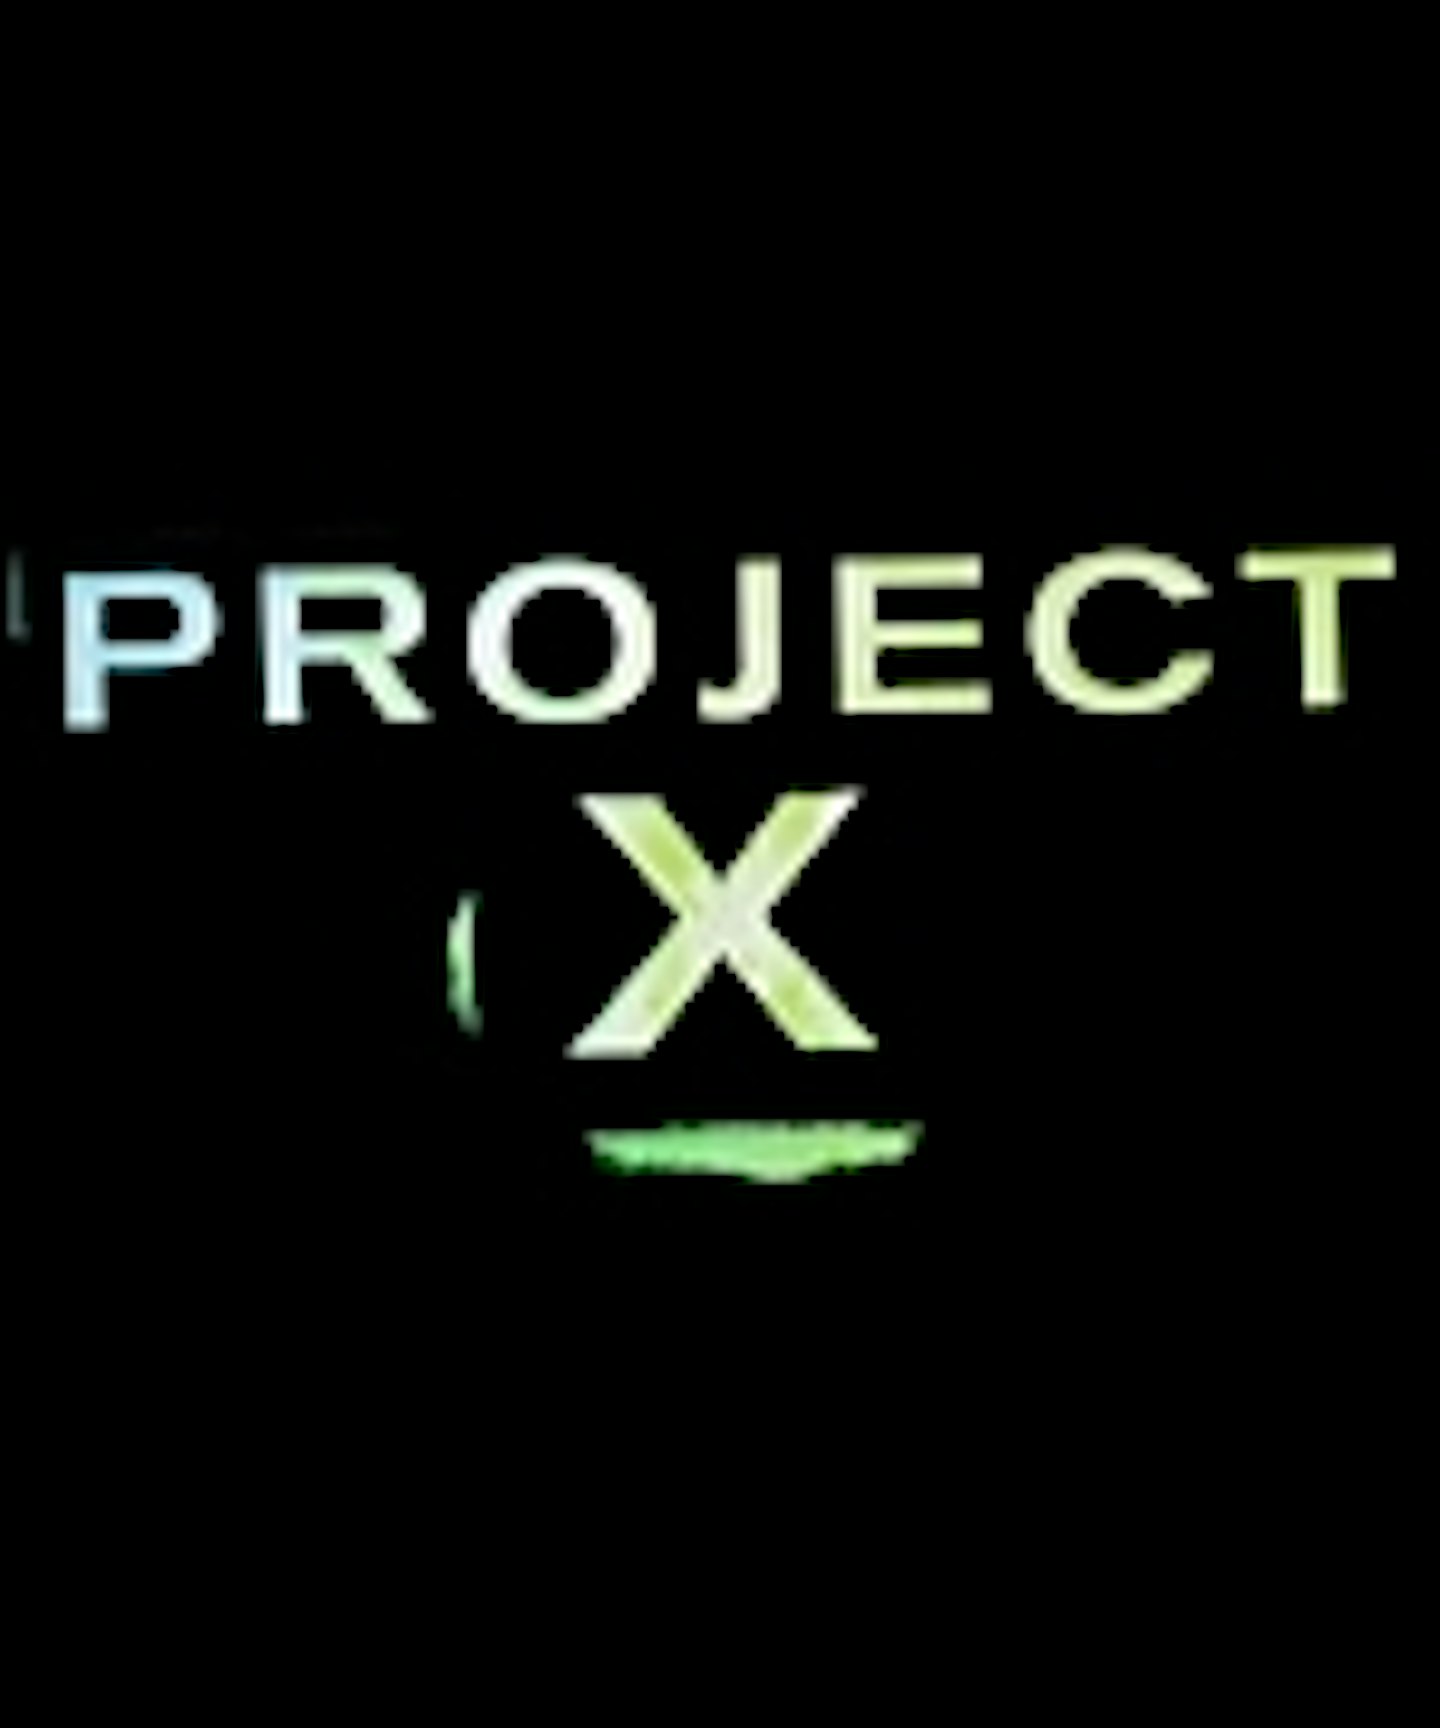 Project X Trailer Crashes In